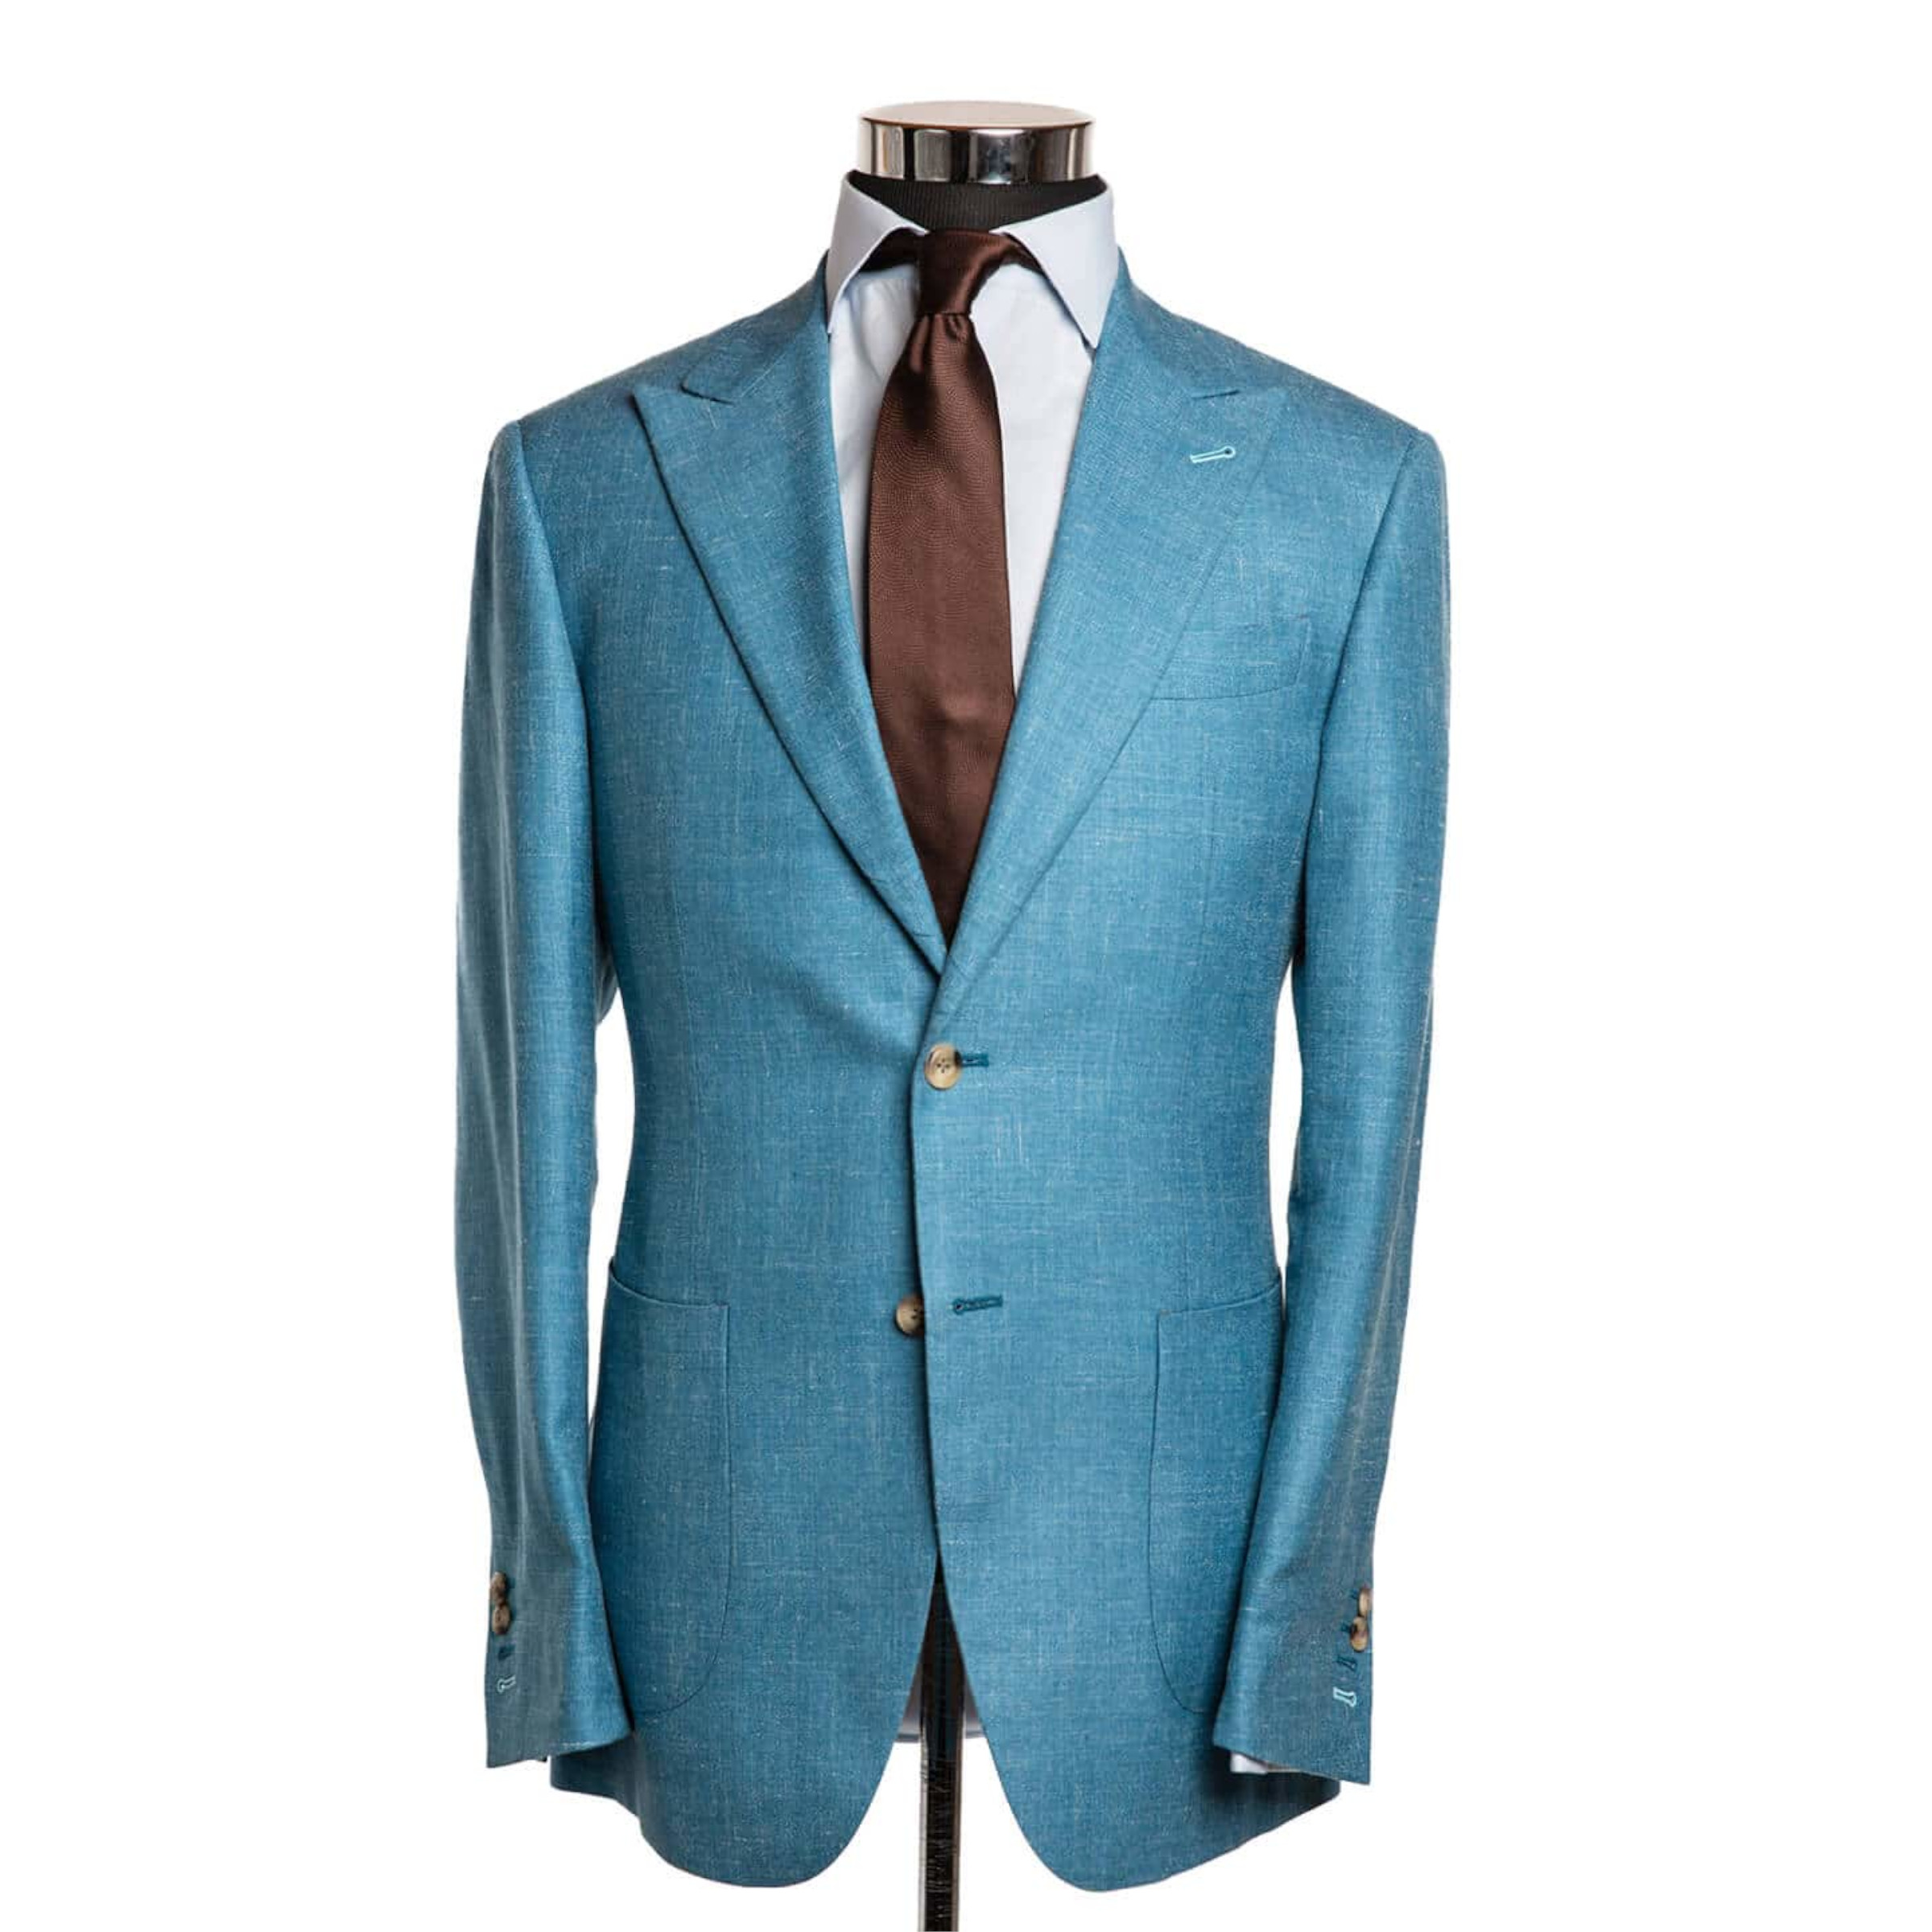 A bright sky blue suit jacket on a body form with a light blue shirt and a chocolate brown tie on a white background